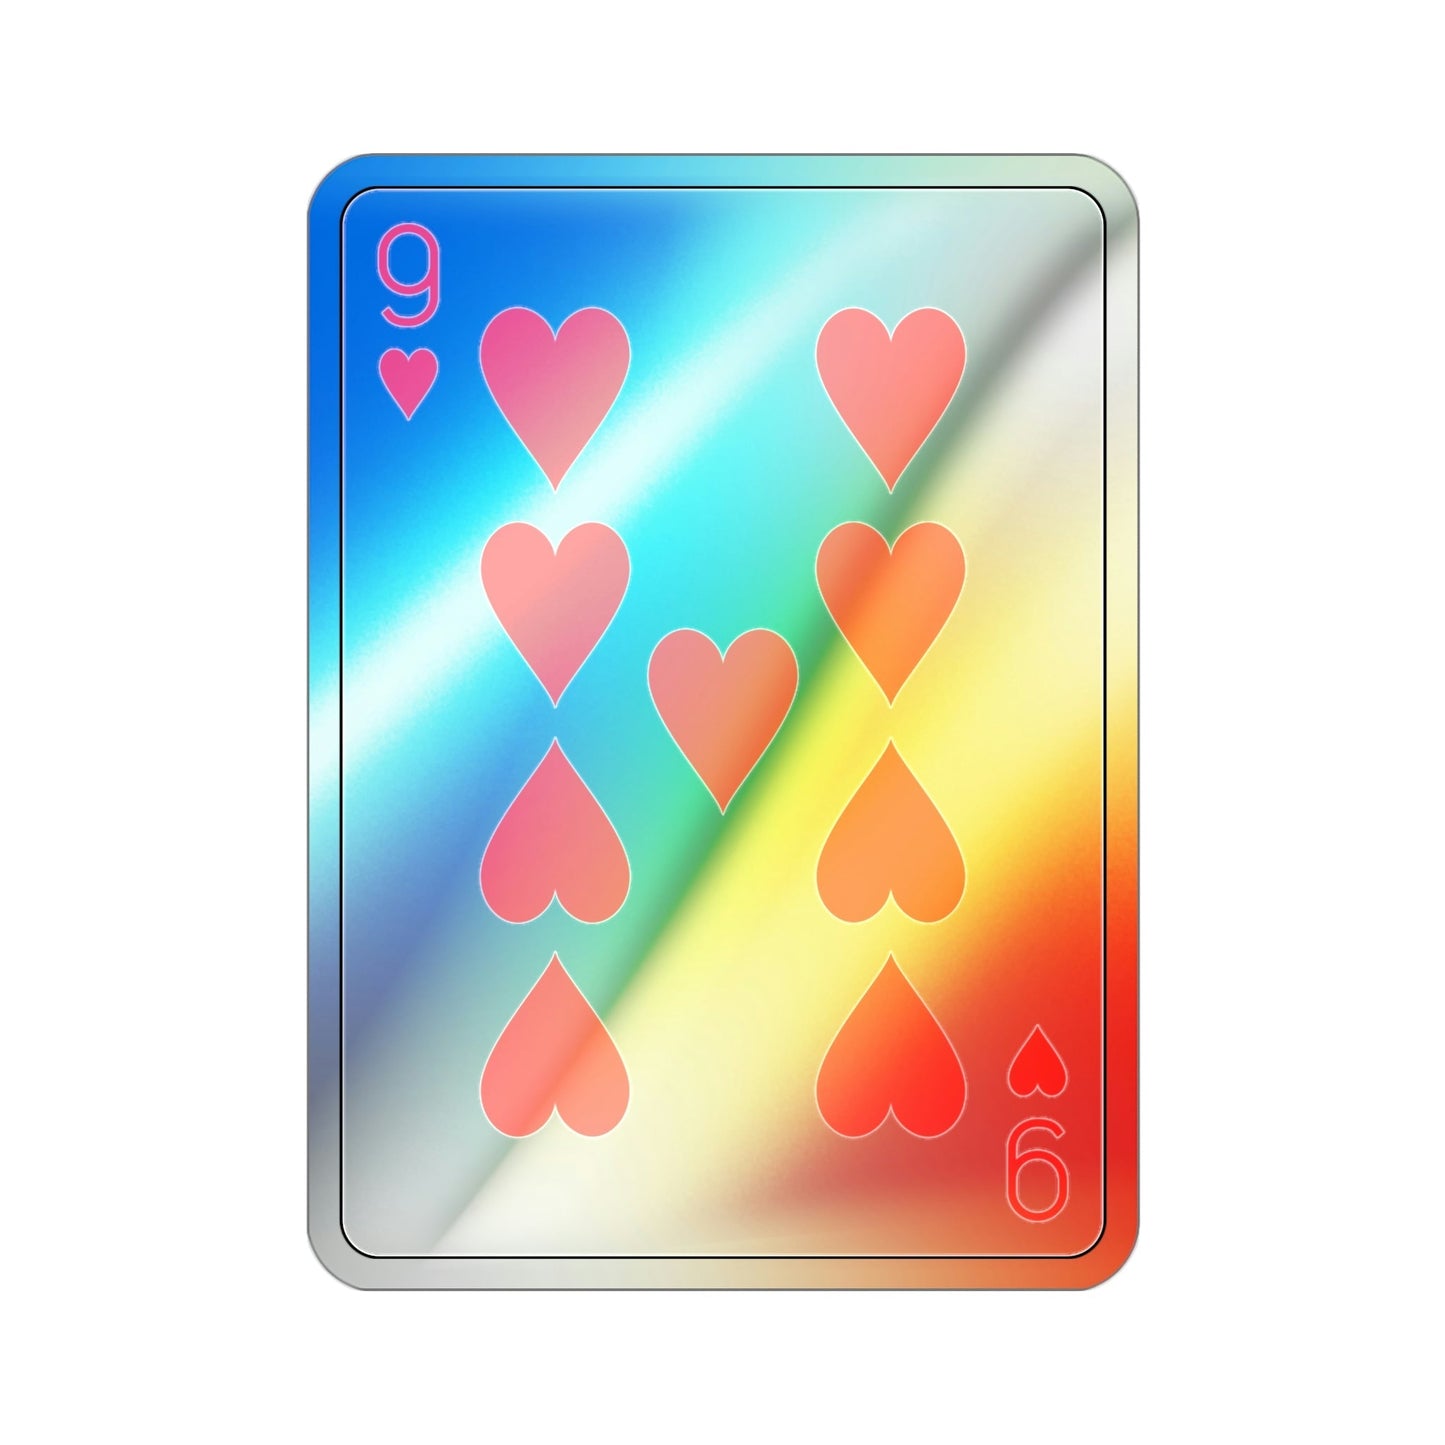 9 of Hearts Playing Card Holographic STICKER Die-Cut Vinyl Decal-3 Inch-The Sticker Space